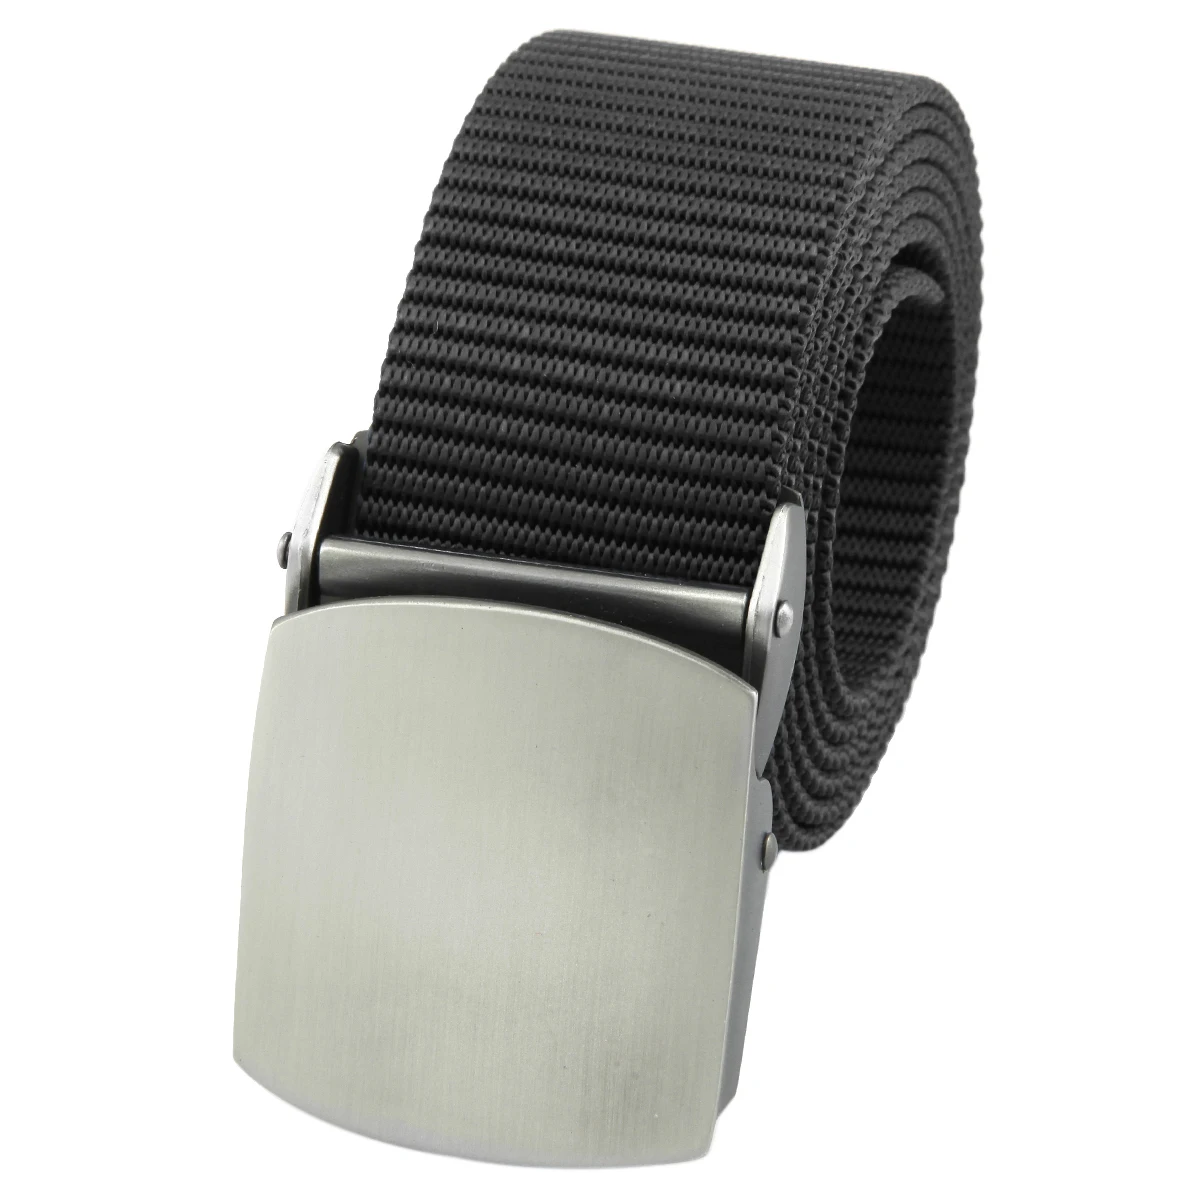 Casual Automatic Buckle Nylon Male Belt Military Tactical Belt Solid Color Cowboy Belt Canvas Long Waistband For Jeans Pants